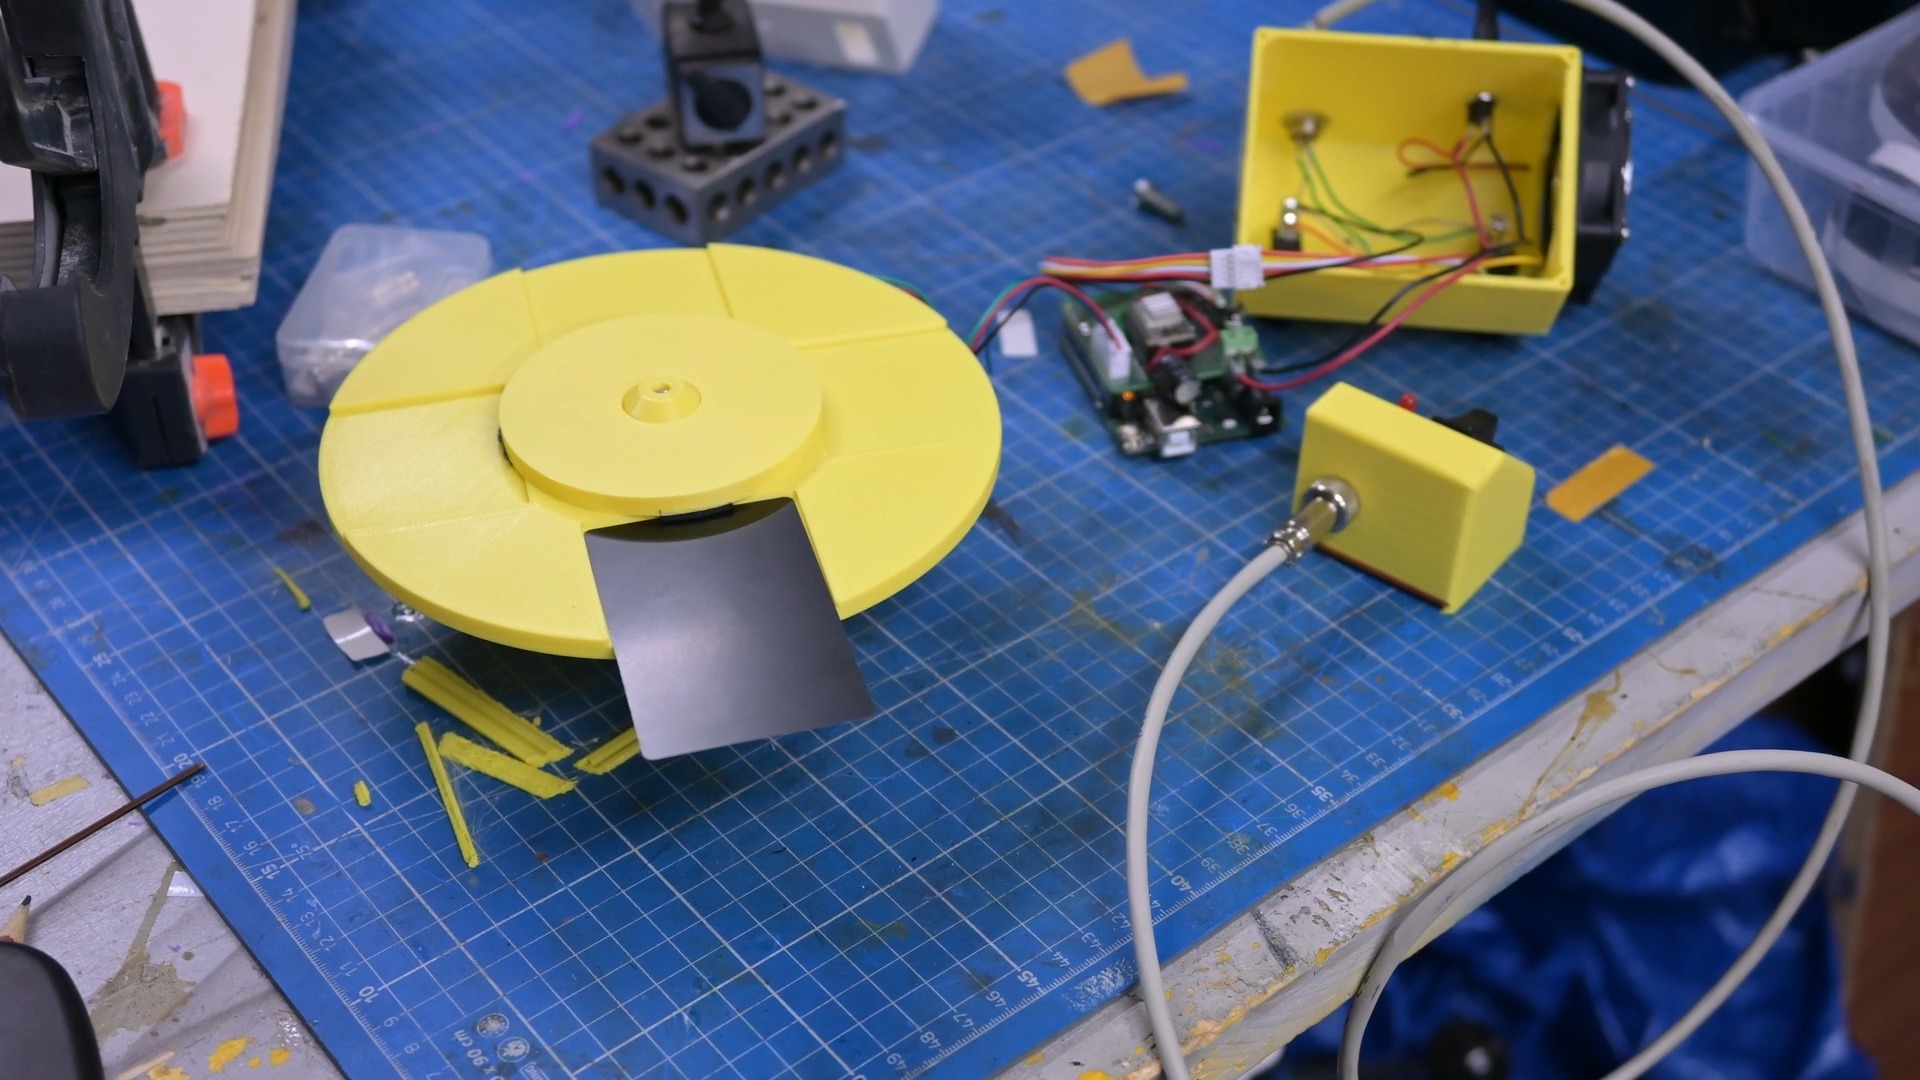 Improve laser engraving speeds with an Arduino-controlled turntable